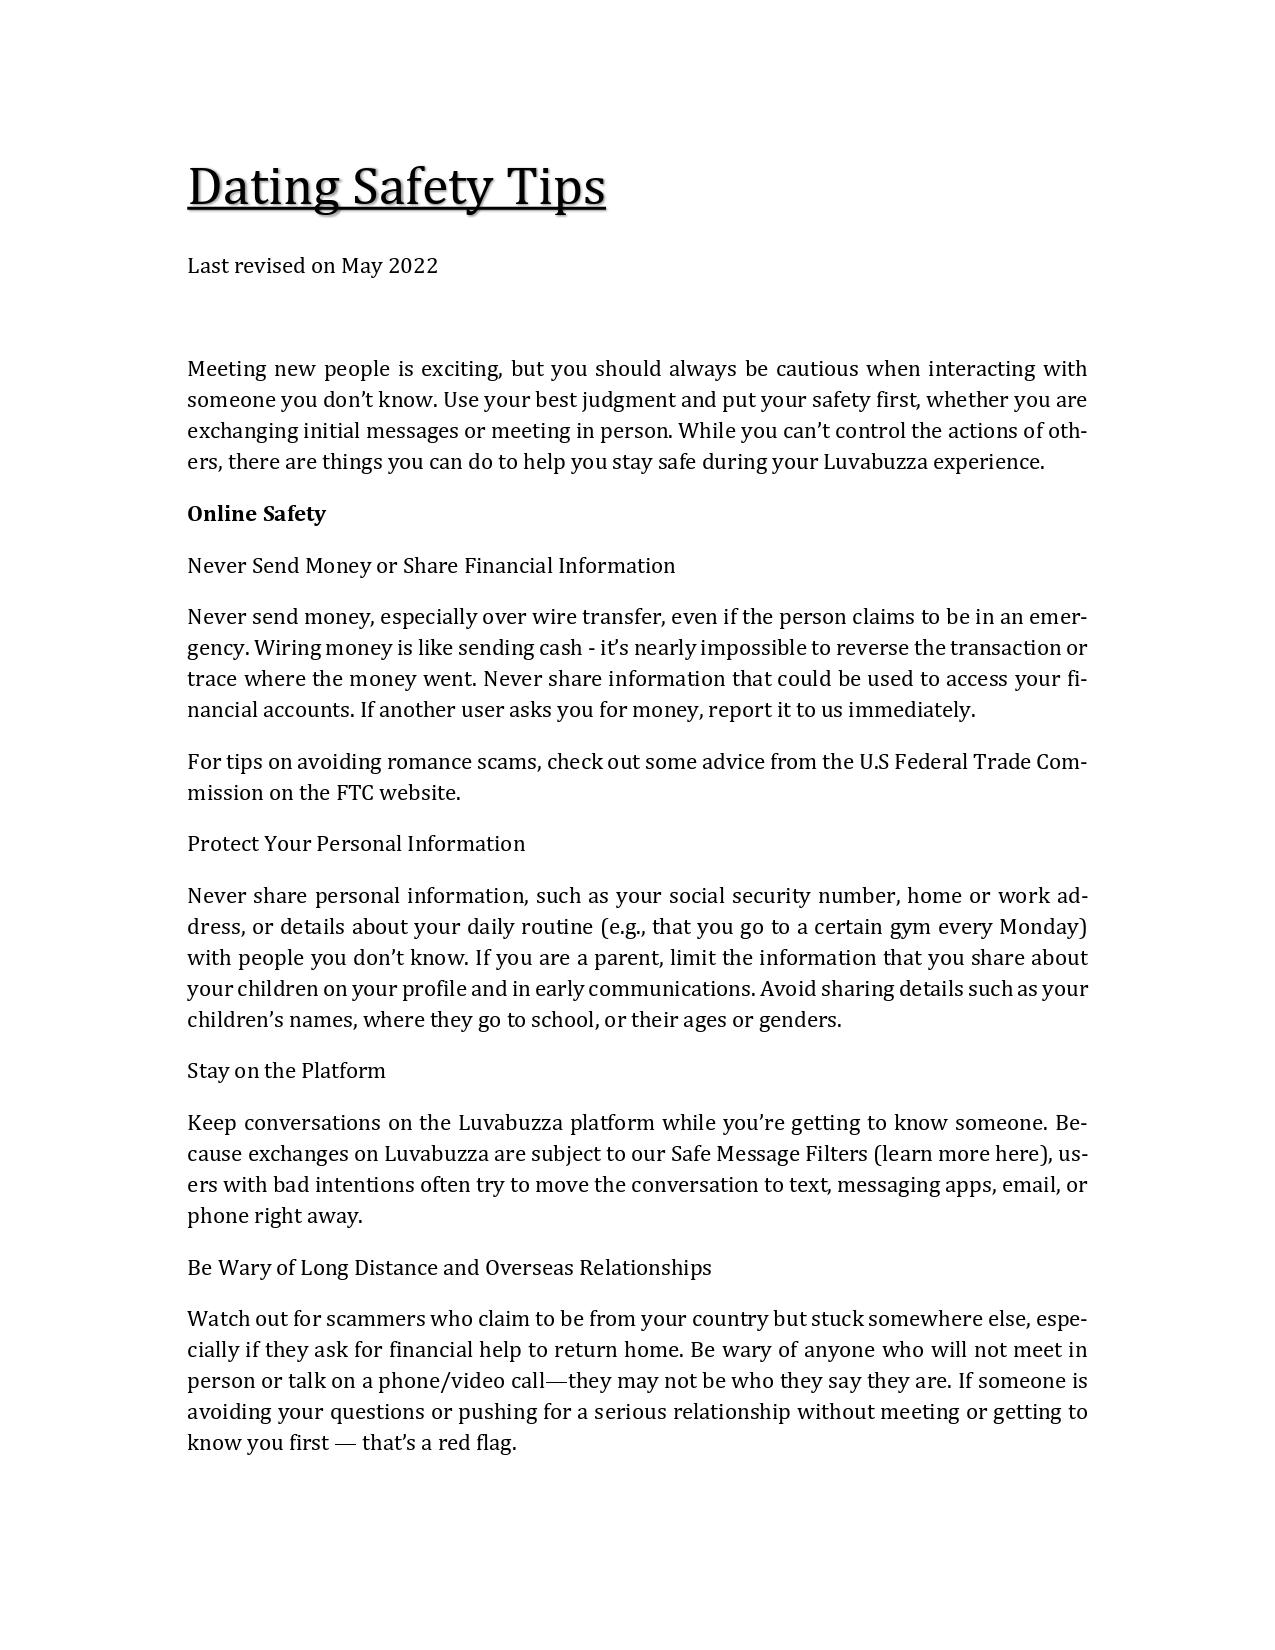 Luvabuzza Dating Safety Tips_page-0001